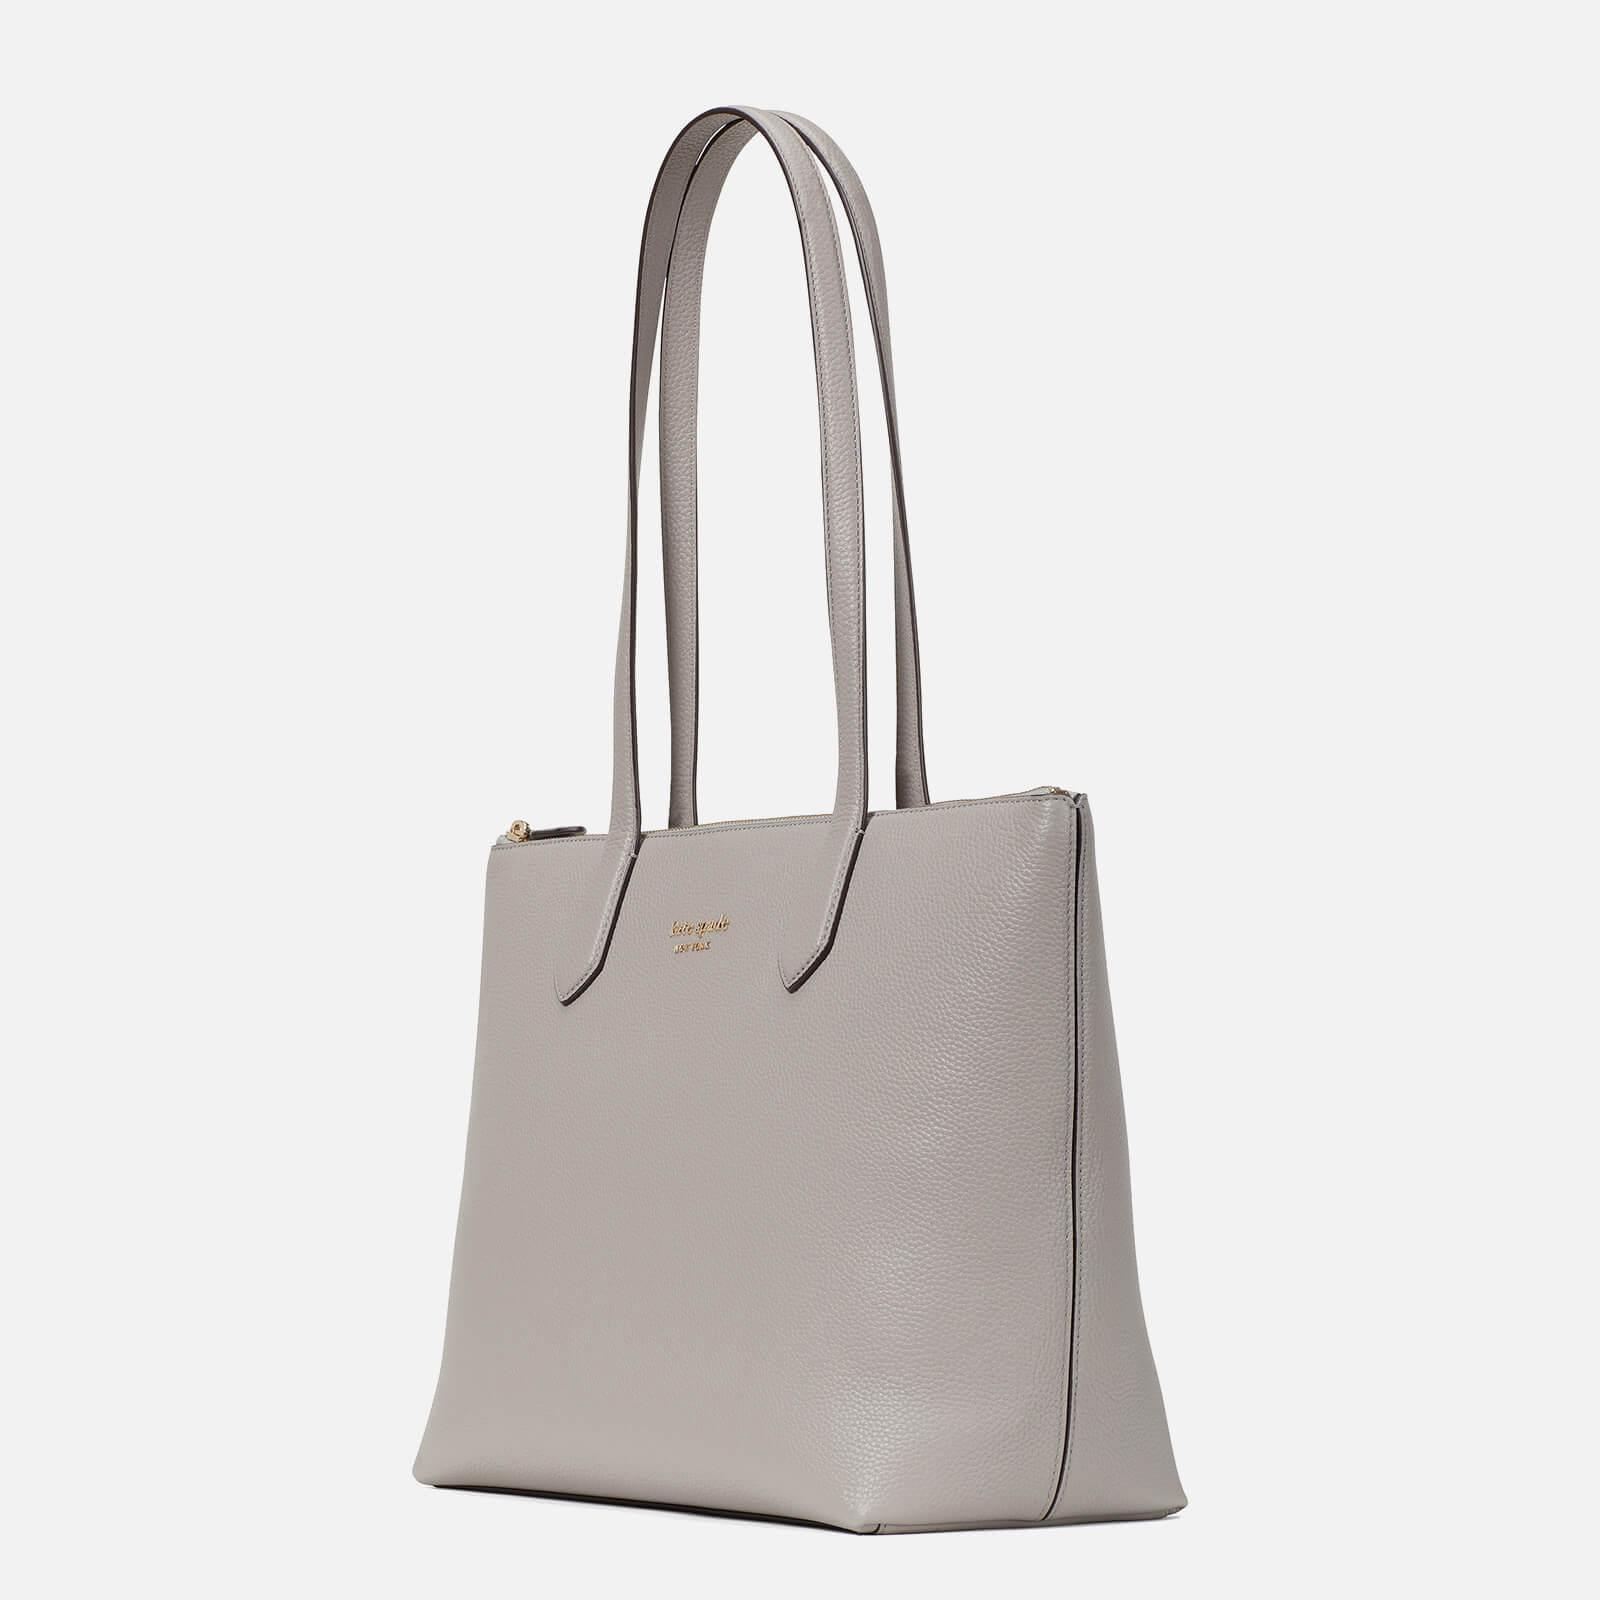 Kate Spade Bradley Pebbled Leather Large Tote Bag in Gray | Lyst